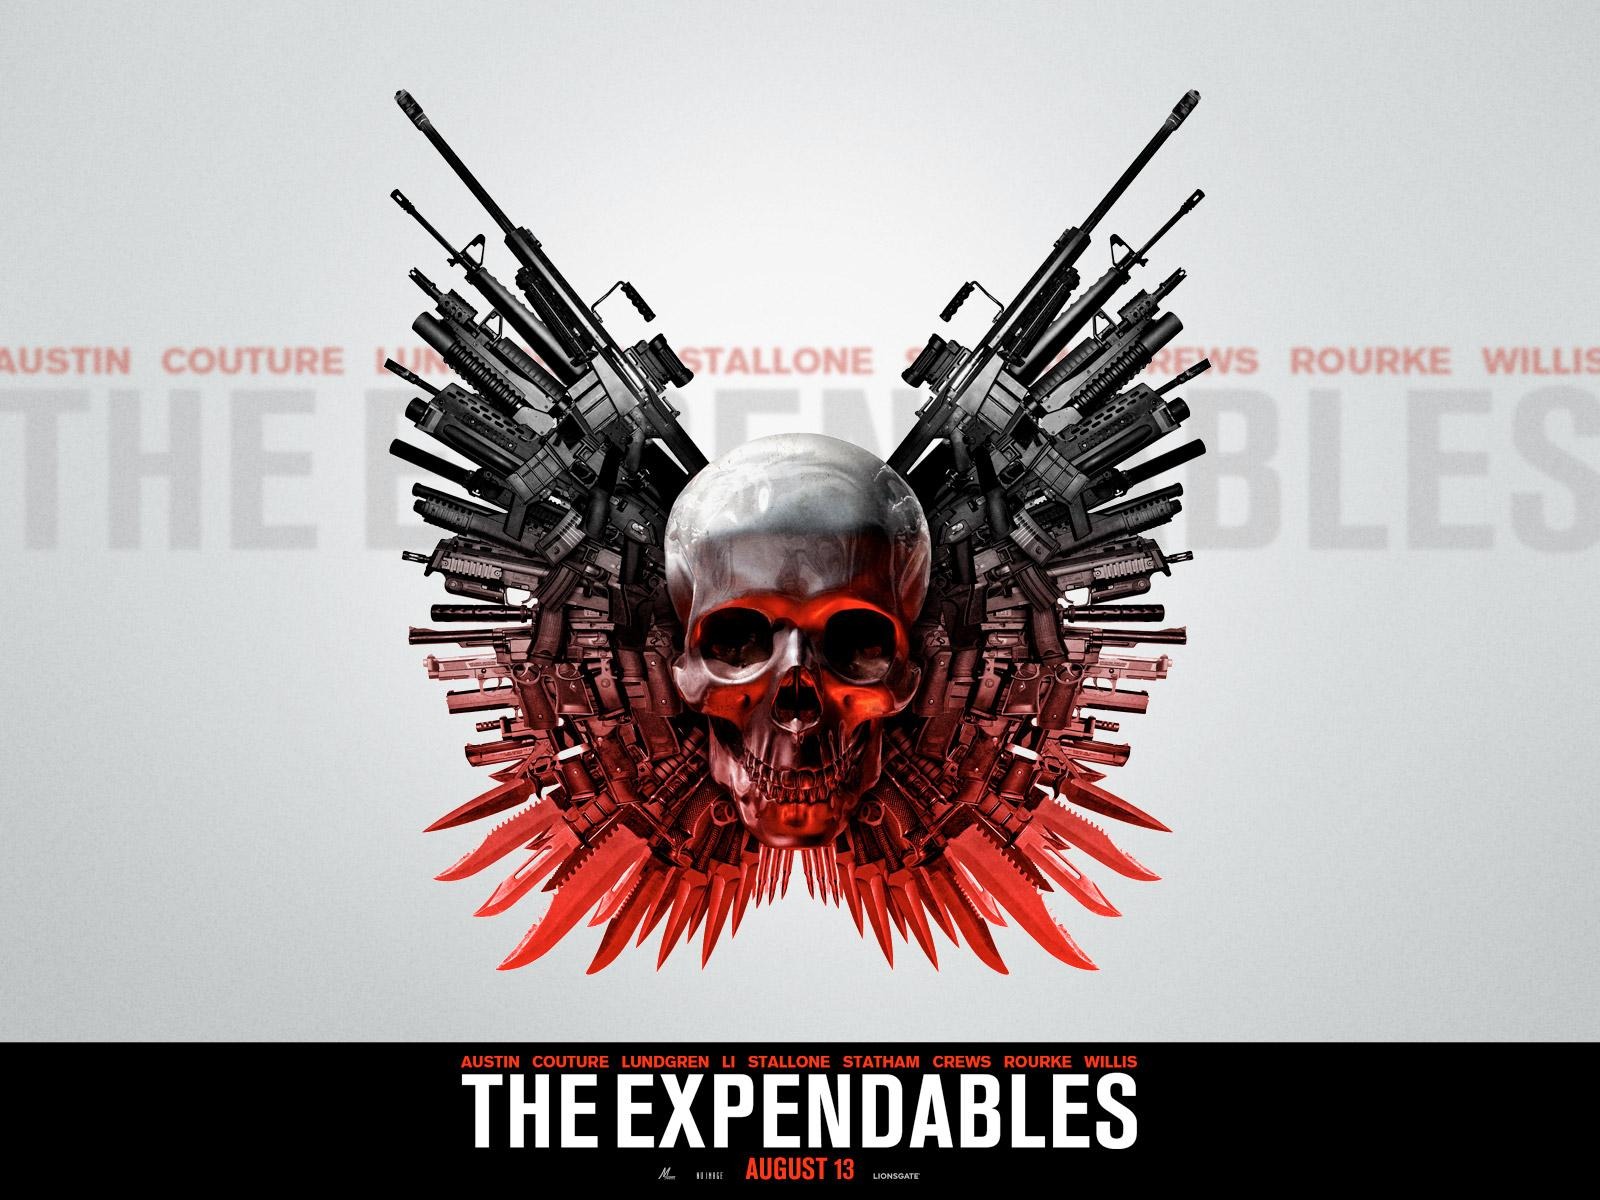 The Expendables HD Wallpaper #16 - 1600x1200